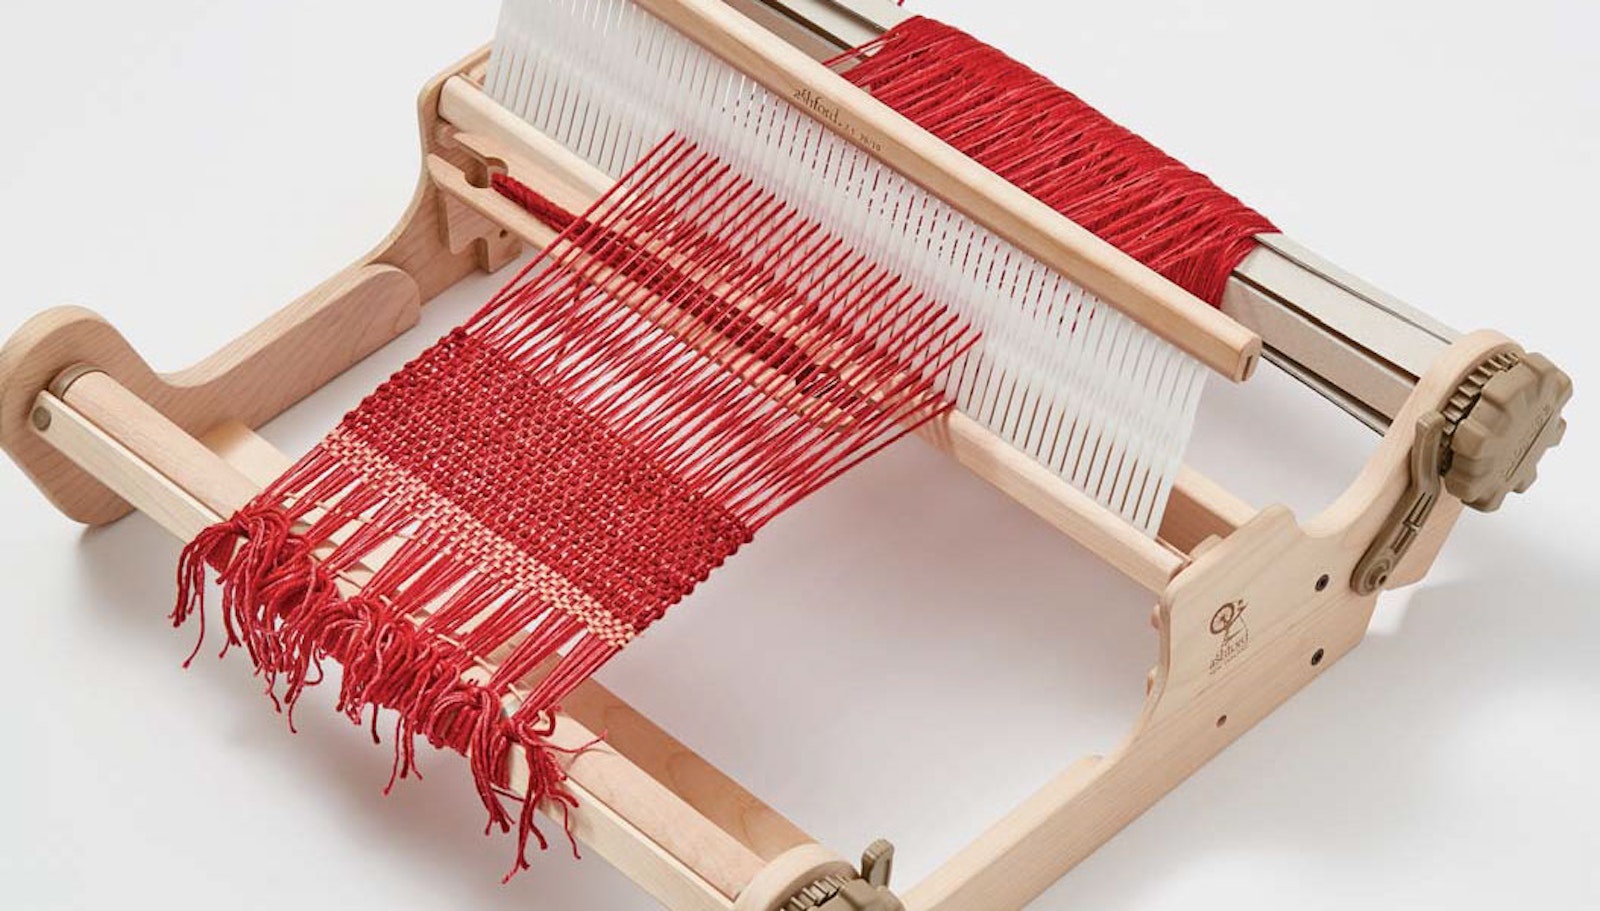 Tapestry Weaving Stand by Friendly Loom